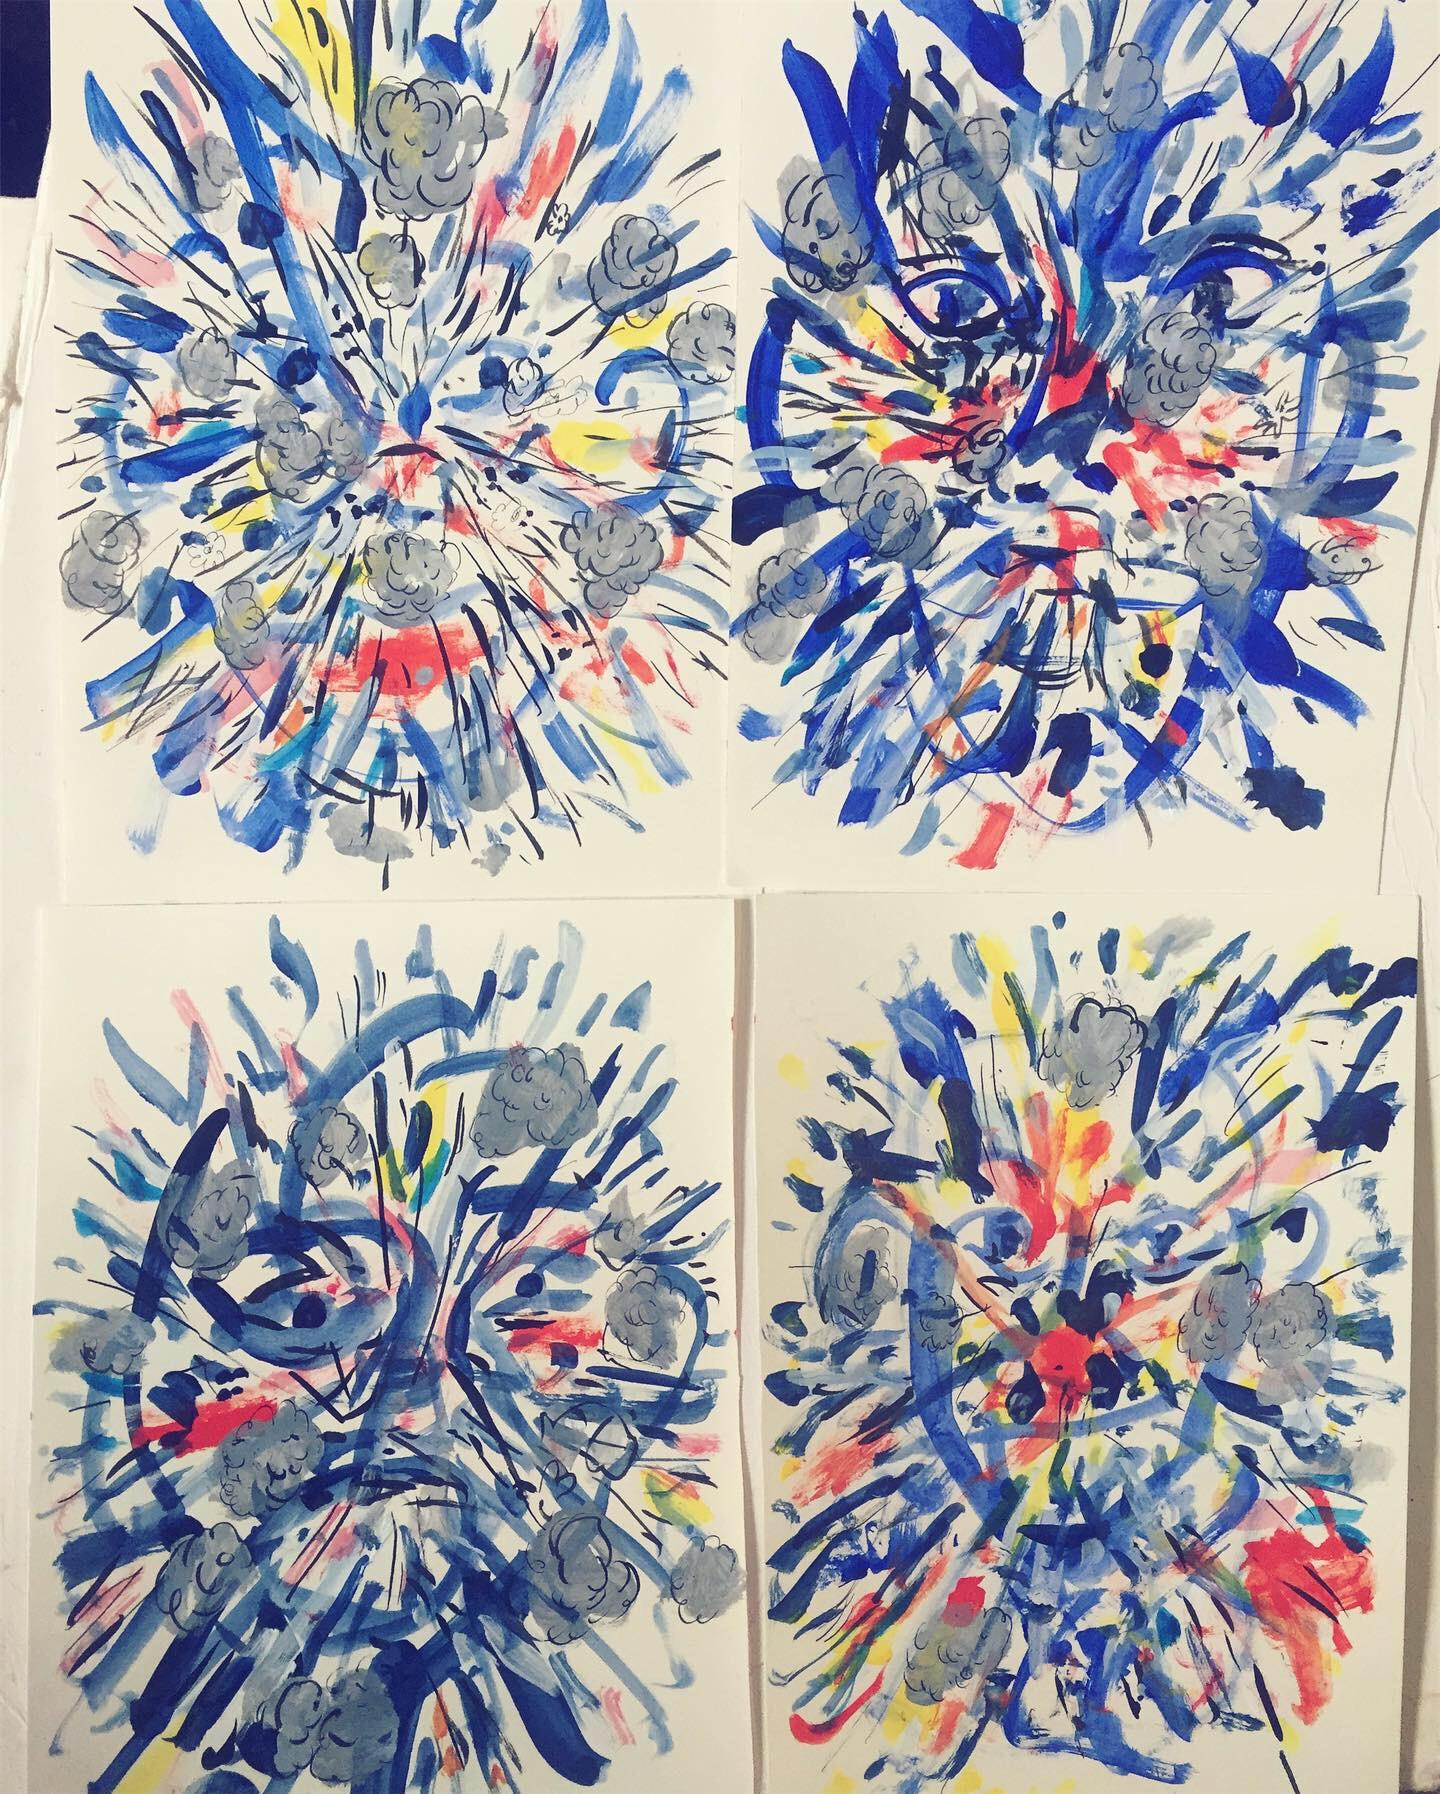 Face Explosion 2  (2 of 4 suite) 9x12 inches on paper - Art by Nina Bovasso